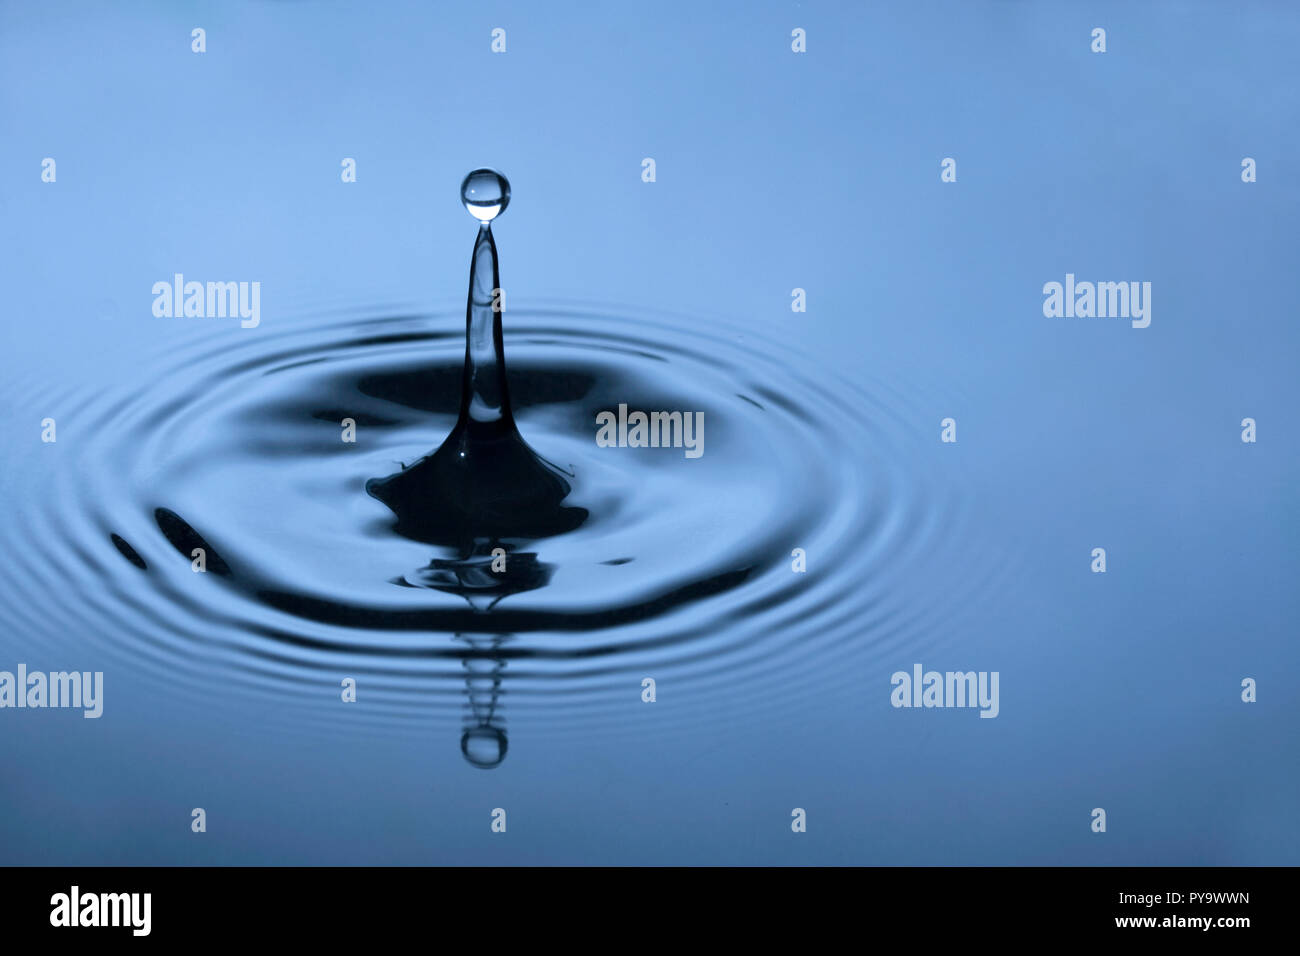 Drop of water creating ripples Stock Photo